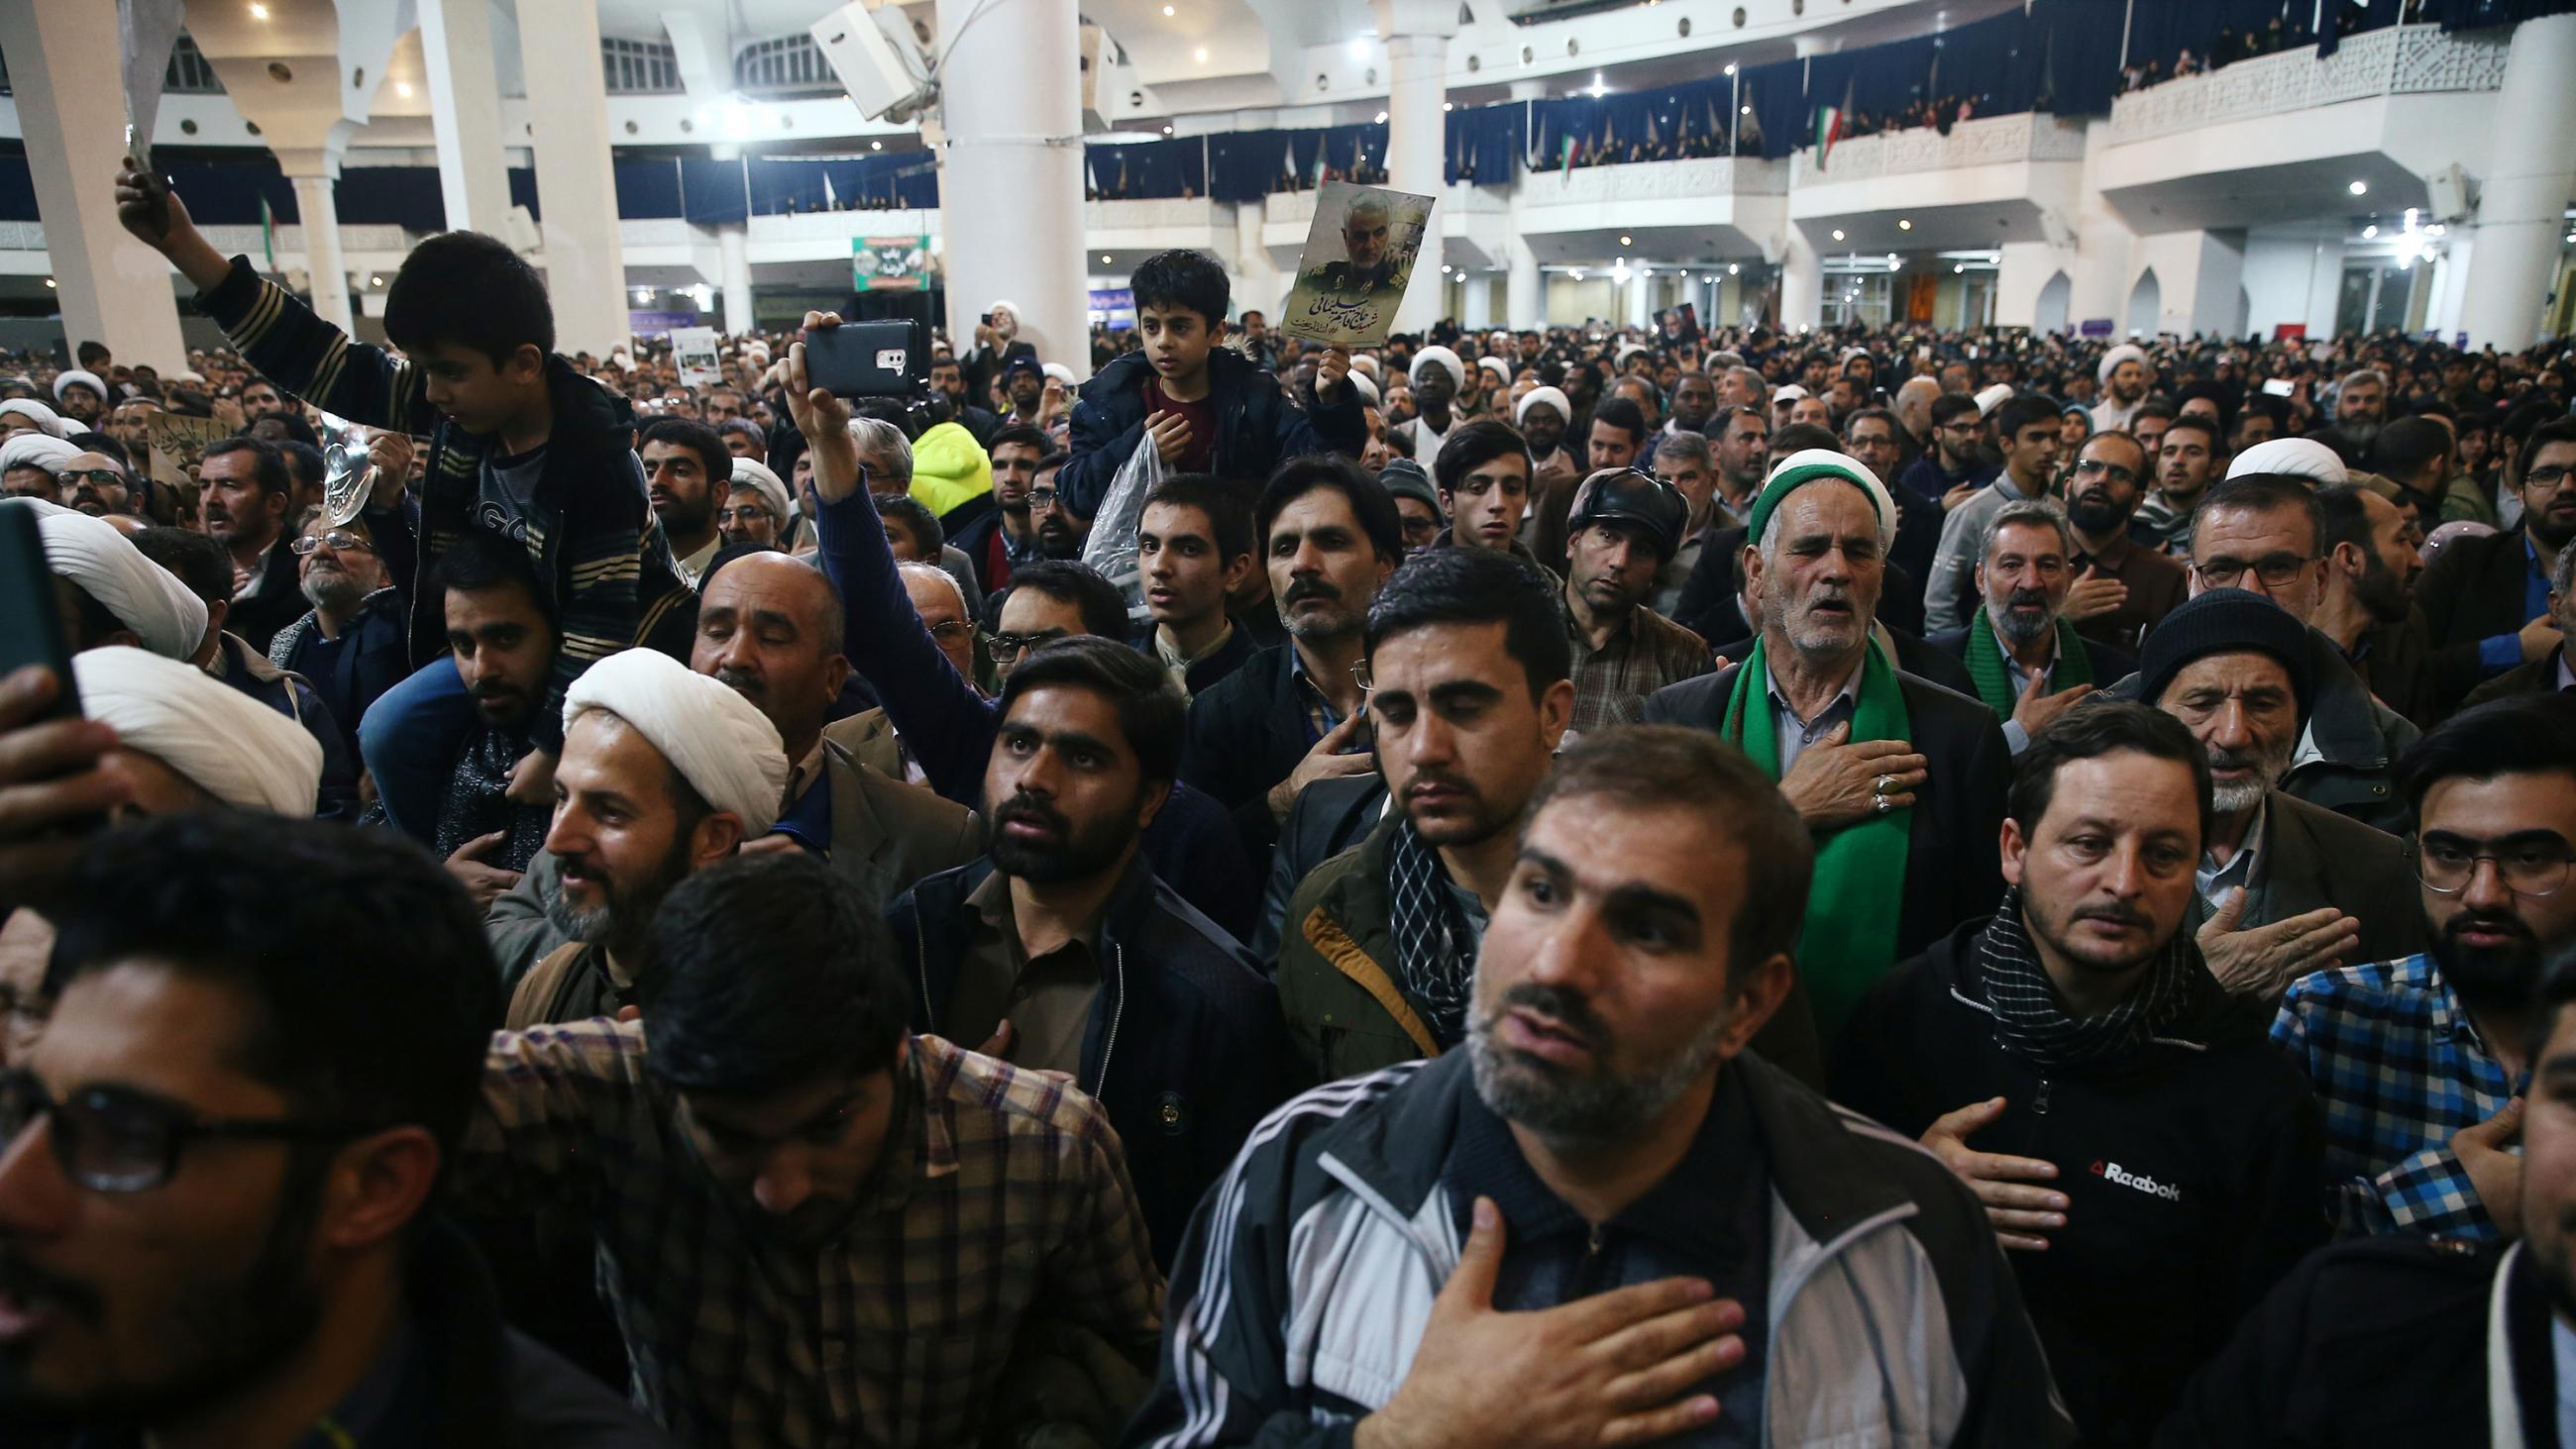 The picture shows the interior of a huge space packed with people standing. Some have their eyes open, and others have their eyes closed, presumably praying. Some hold their hand over their heart. Some hold cell phones up. A few young boys are on top of the shoulders of grown men. 